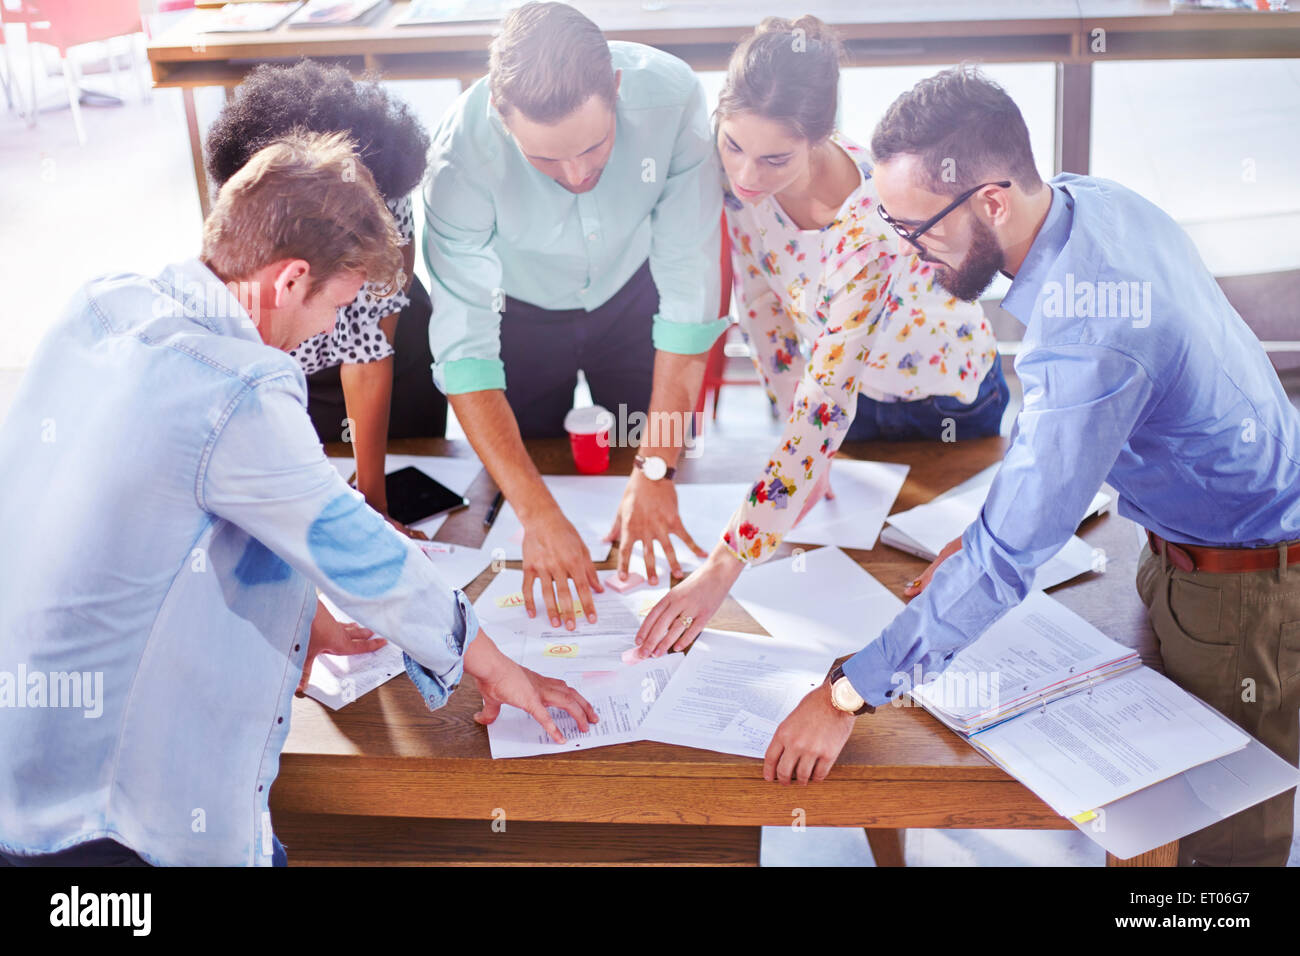 Business people reviewing paperwork and brainstorming in meeting Stock Photo